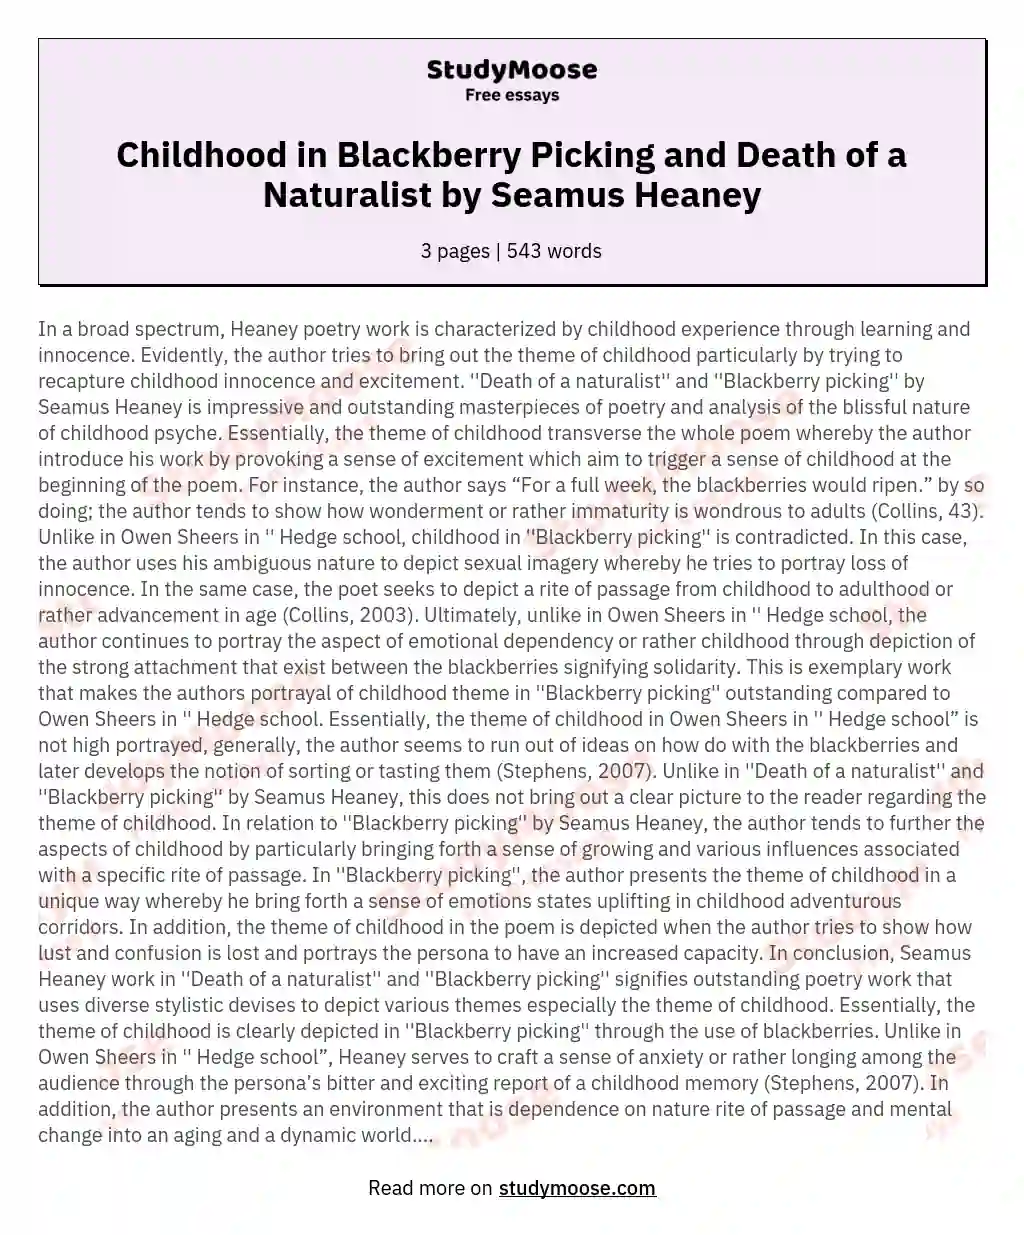 Blackberry Picking and Death of a Naturalist by Seamus Heaney - The theme of childhood